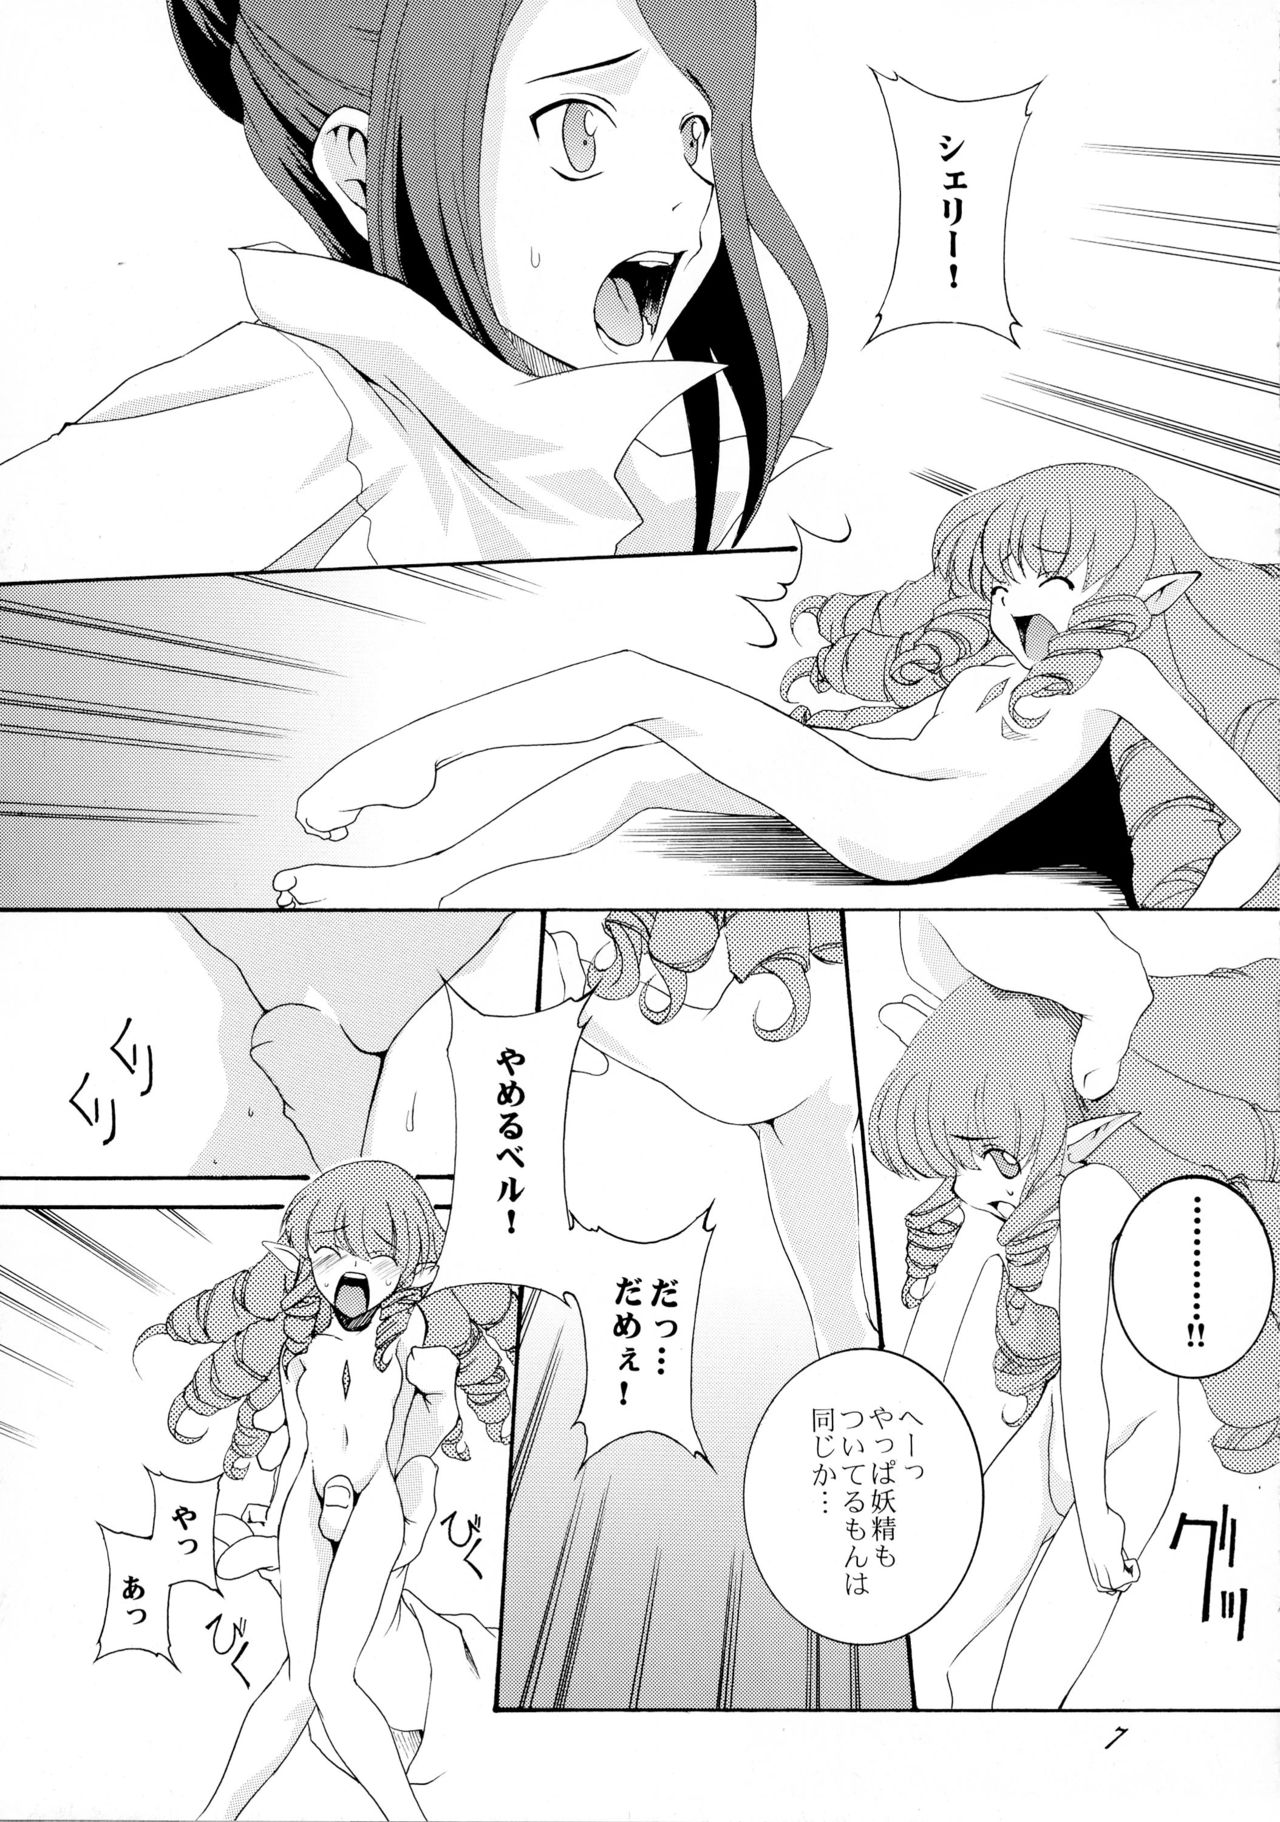 (C72) [F-A (Honoutsukai)] Gothic of Wellber (Wellber no Monogatari) page 7 full